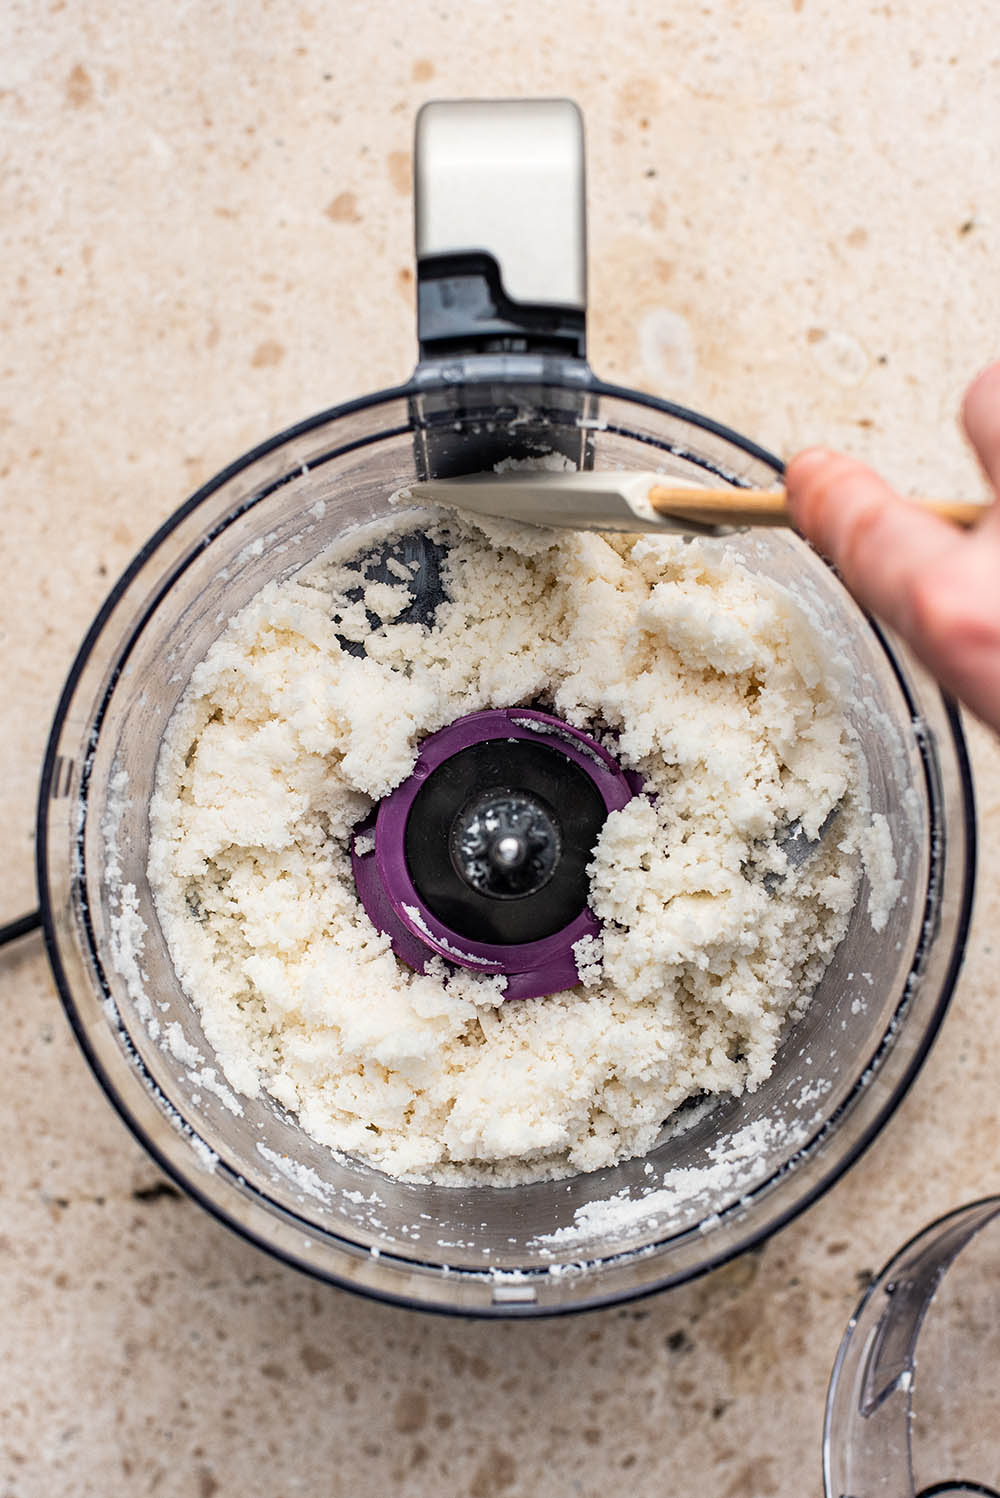 Scraping down the sides of the food processor.